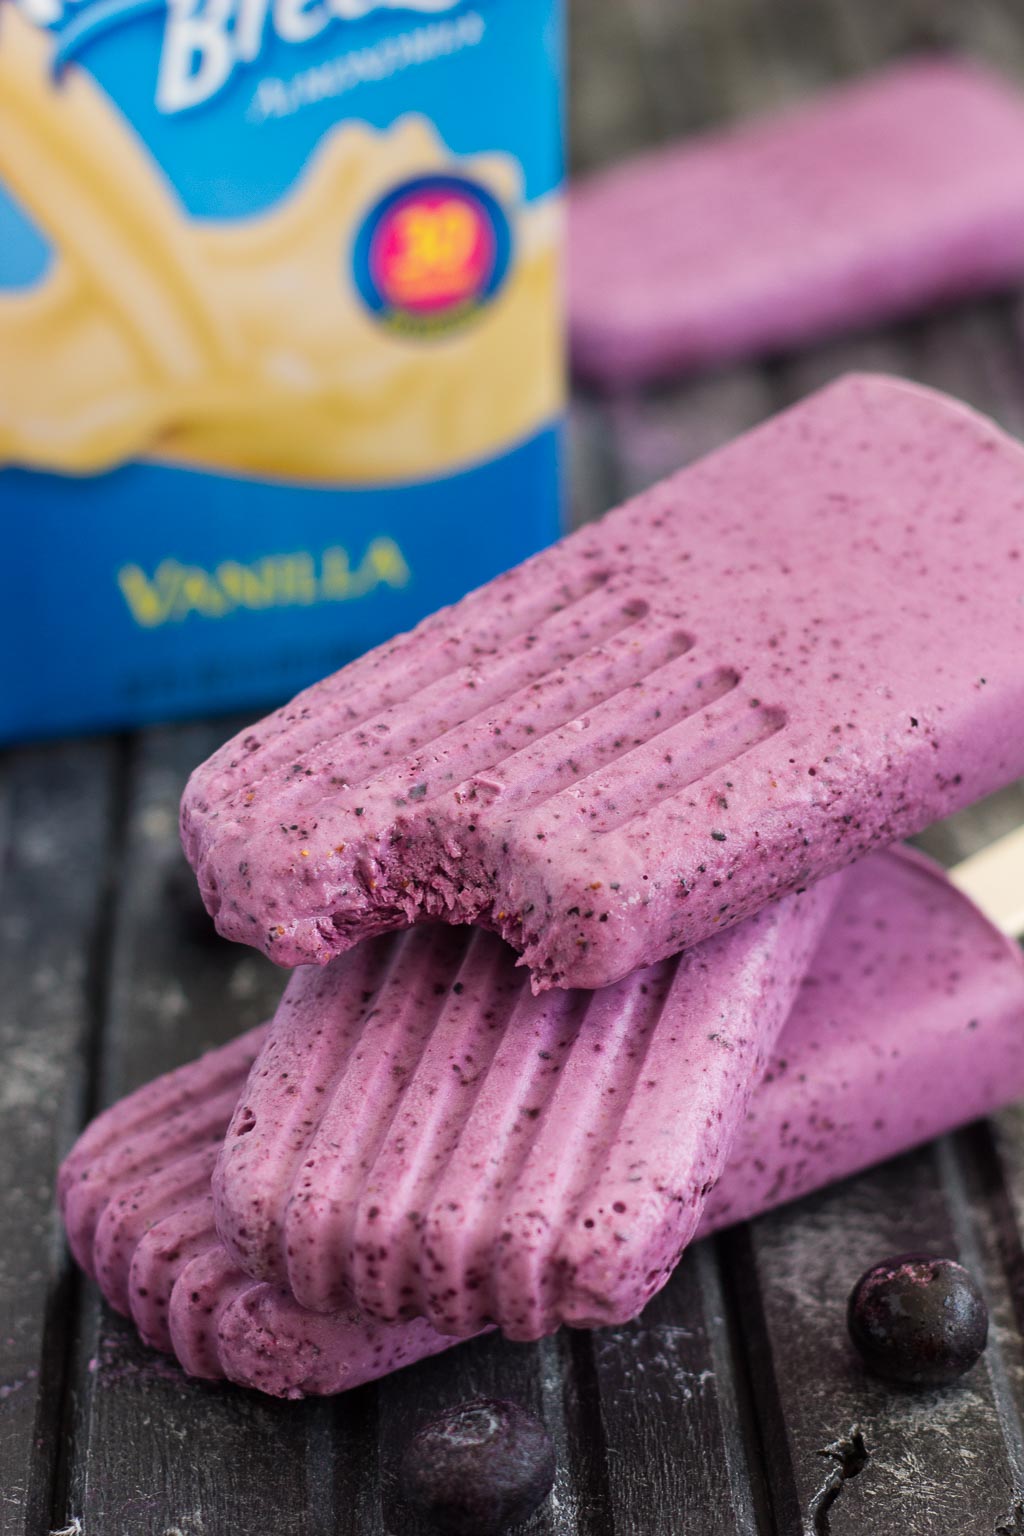 These Blueberry Cheesecake Pops taste like your favorite baked good, in frozen form. Filled with a cream cheese mixture that's studded with blueberries, these pops take just minutes to make and are perfect for cooling off with on a hot, summer day!